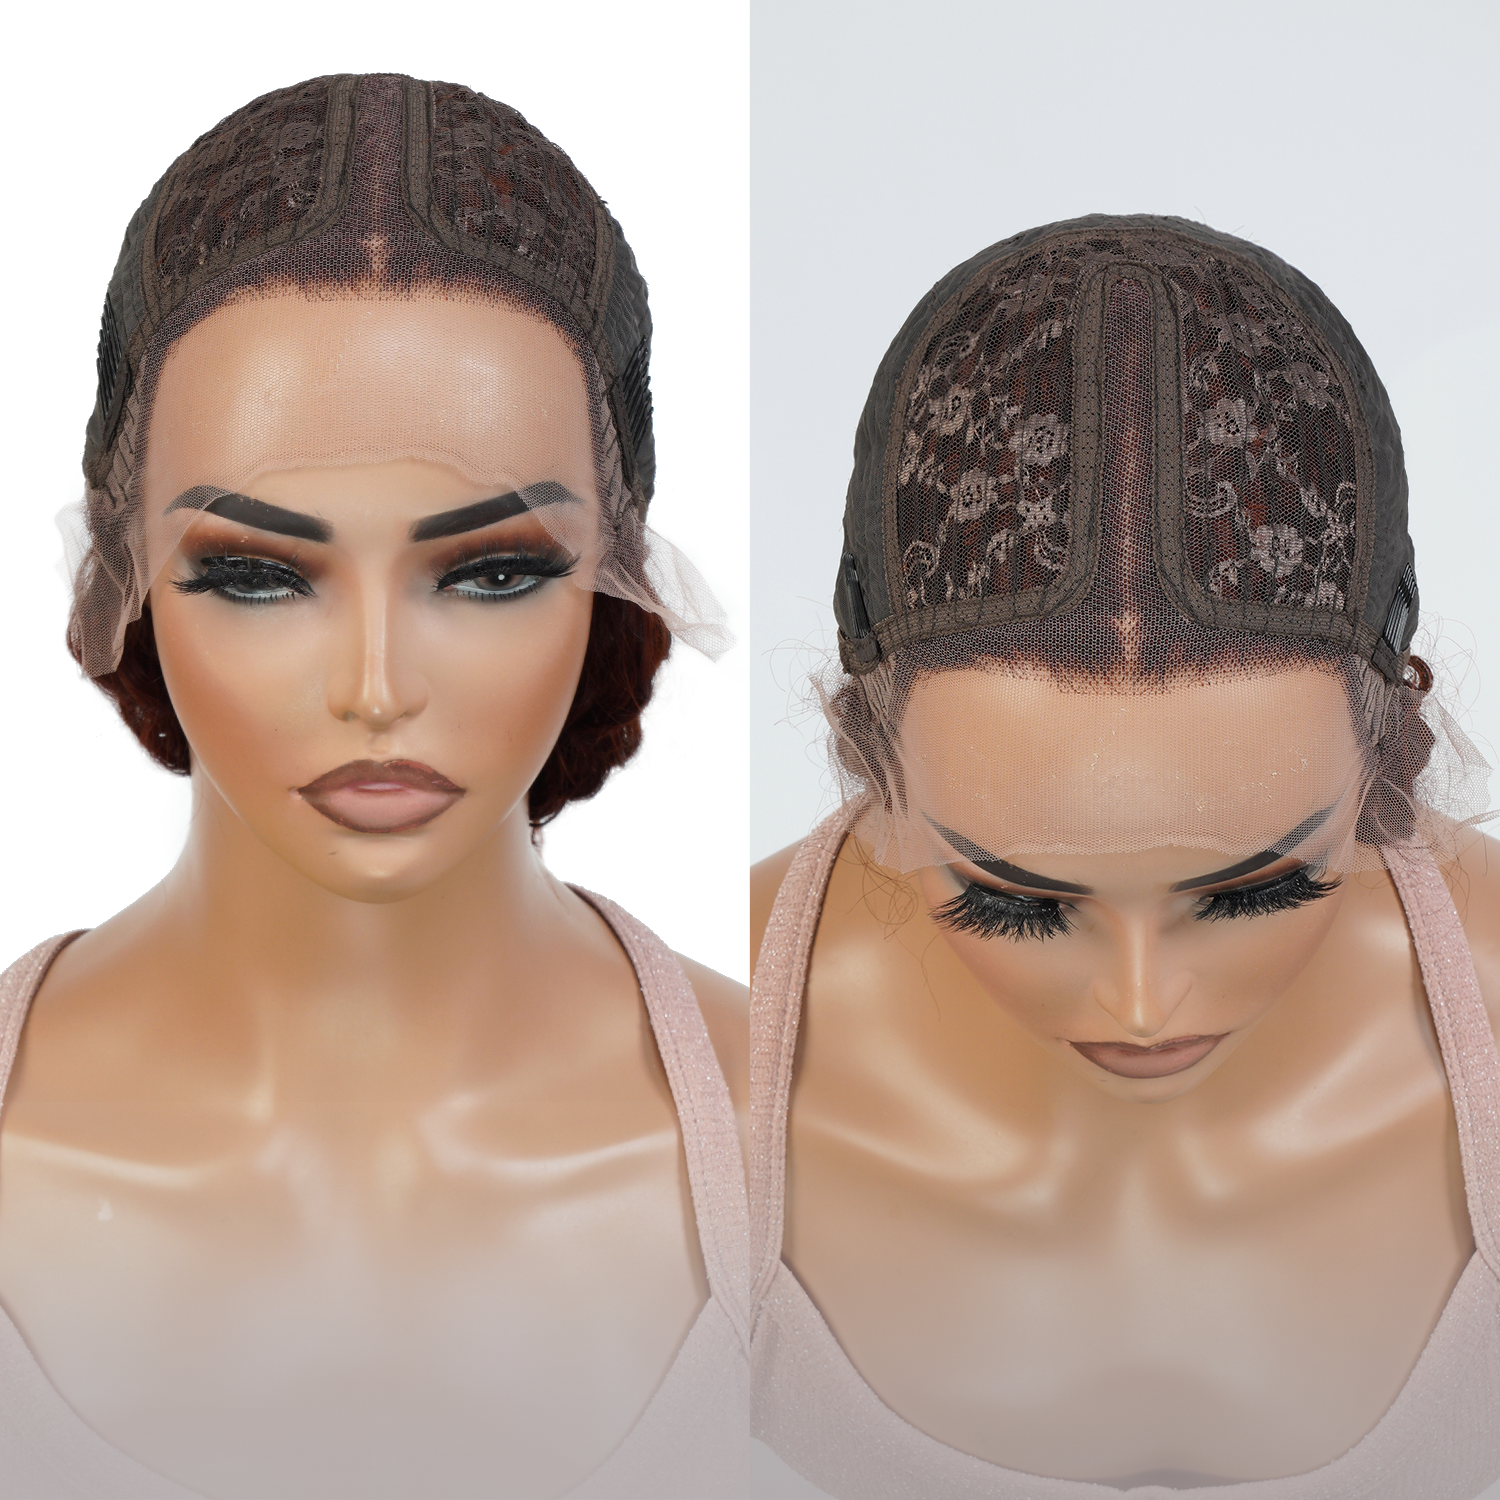 T-Part lace frontal human hair wigs are the cheapest transparent HD lace front wigs with ear to ear lace, Natural and imperceptible hairline, Super soft and smooth texture, Don't spend your money on bleach and dye hairs, Just get this beautiful pre-colored wig